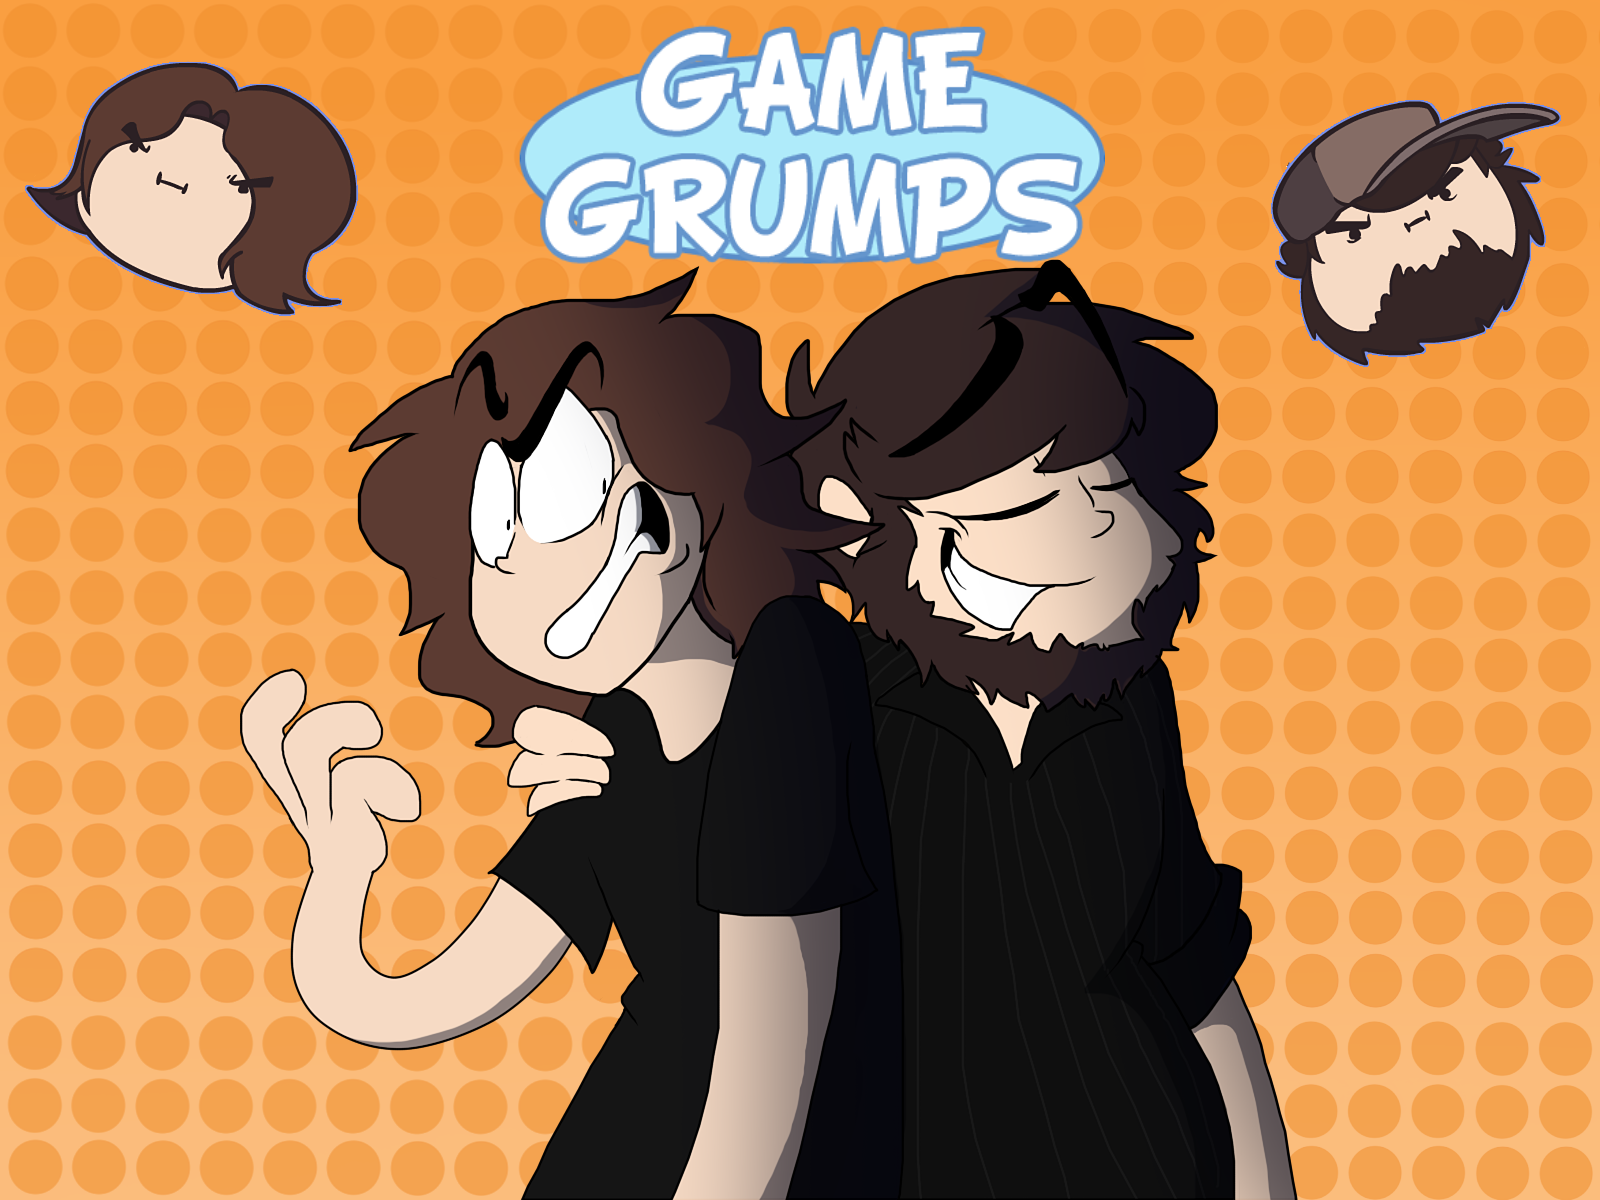 Amazon's choice for game grumps. 